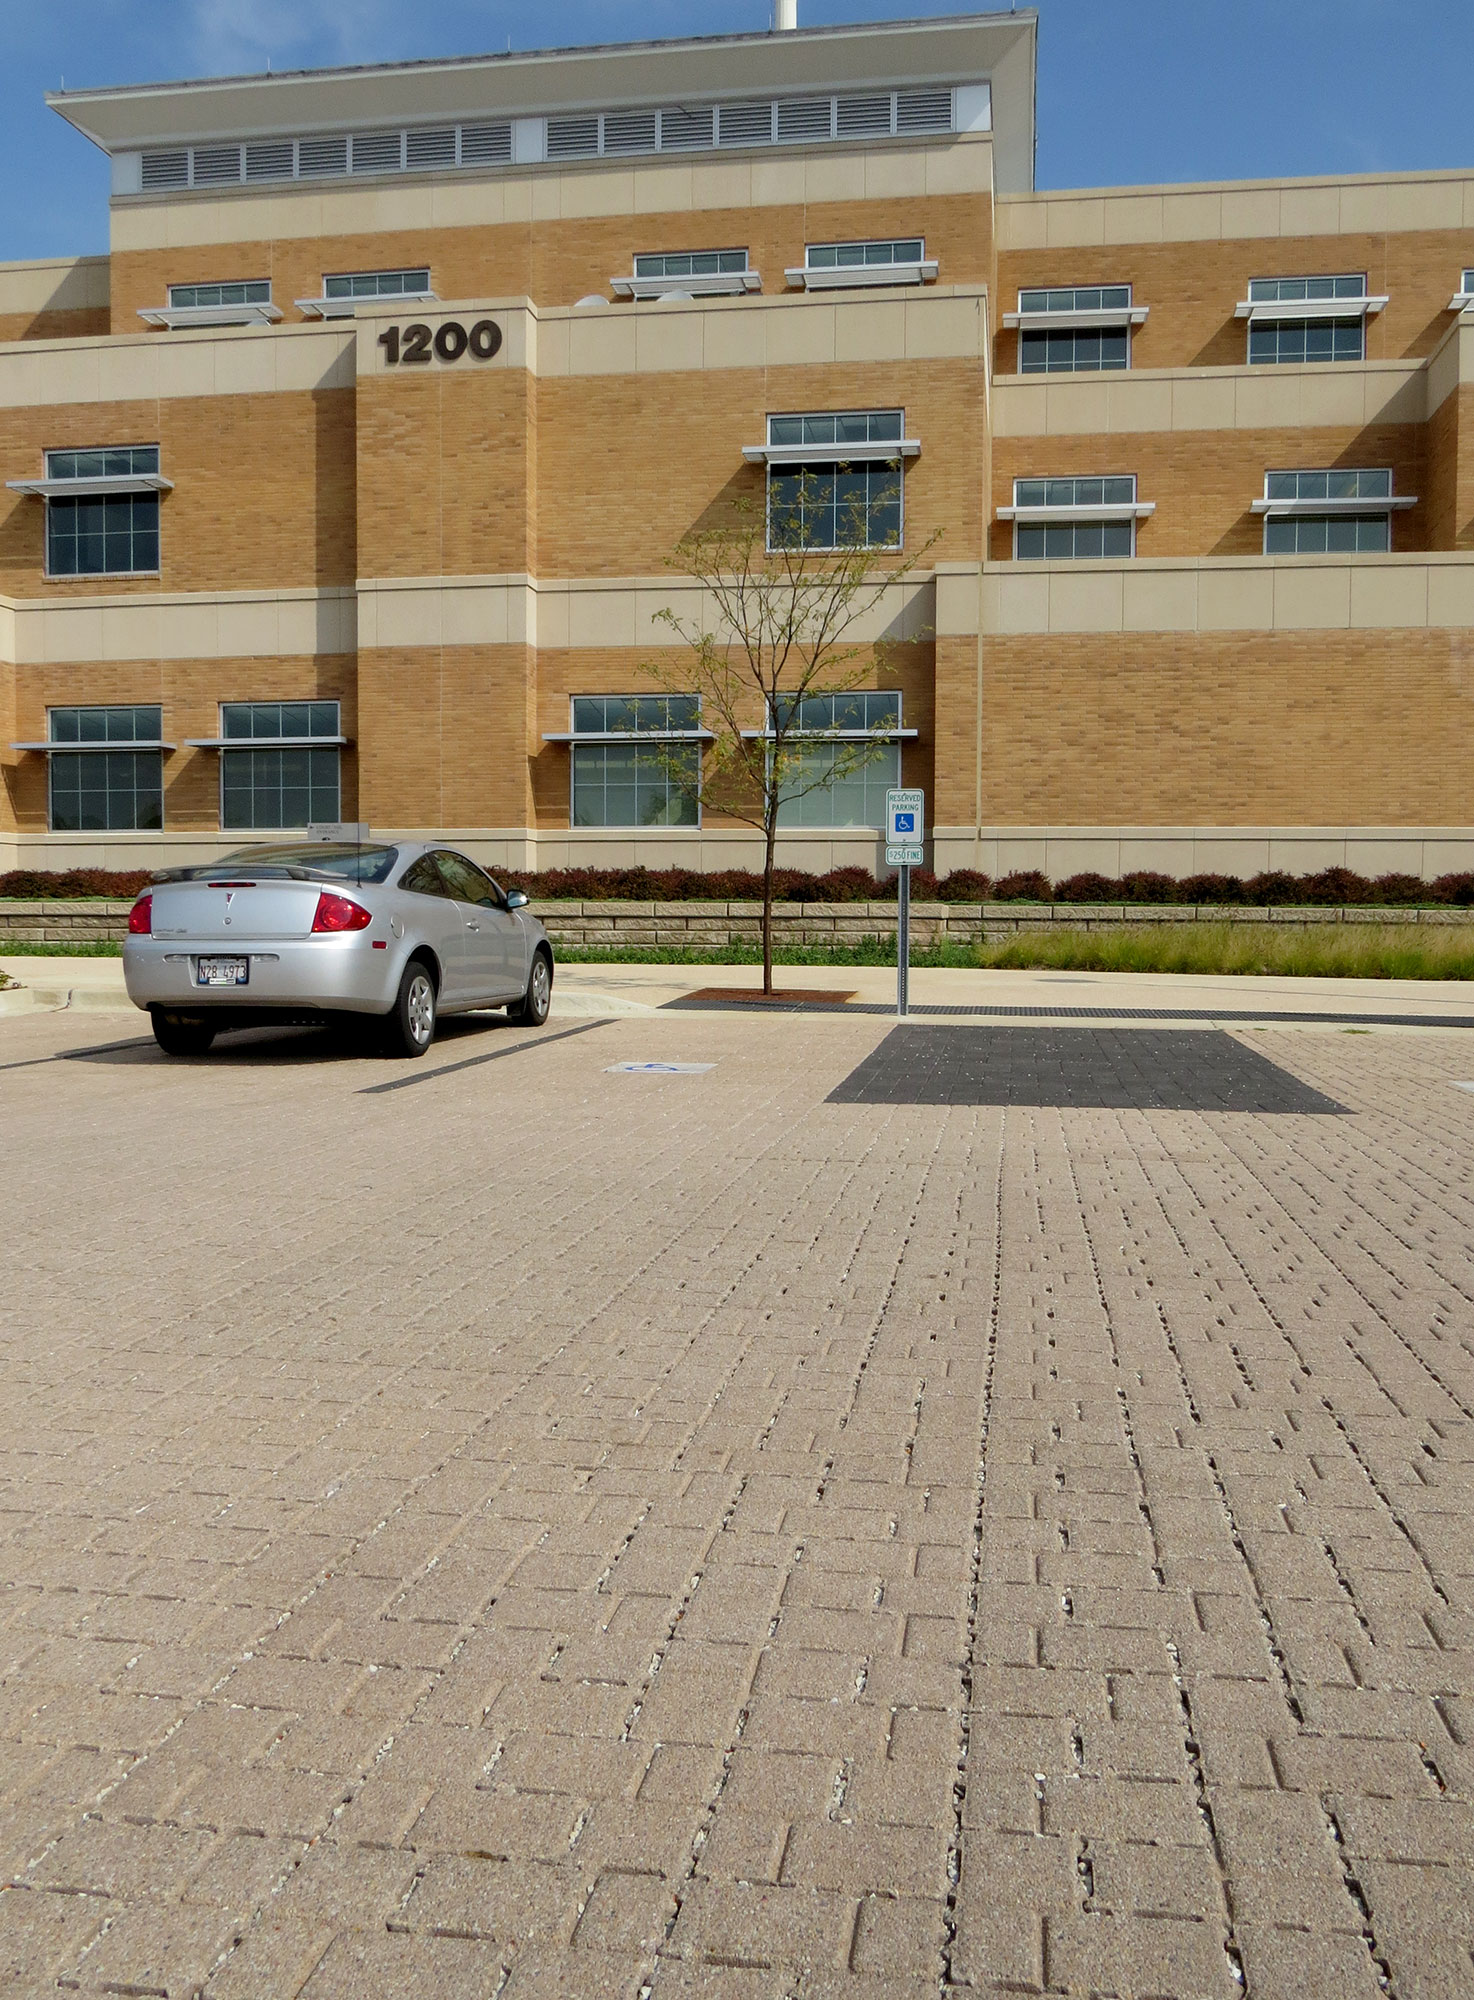 Eco-Optiloc permeable pavers in contrasting colors mark parking spots in front of a brick building with a Siena Stone walled garden.